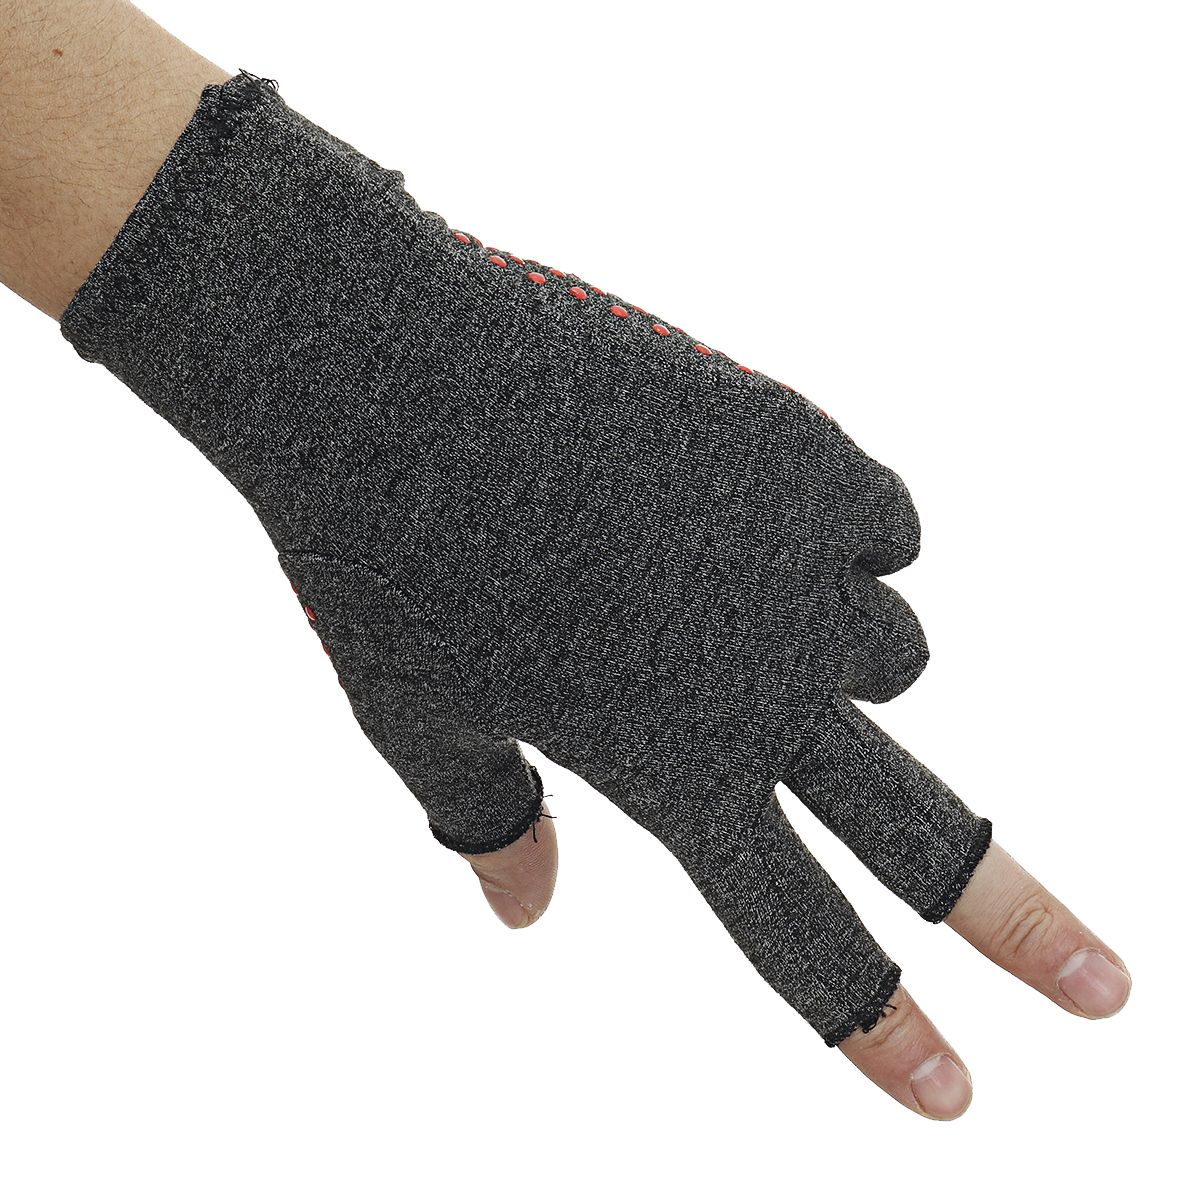 1-Pair-Compression-Arthritis-Gloves-Arthritic-Joint-Pain-Relief-Hand-Gloves-Therapy-Open-Fingers-Com-1777634-5